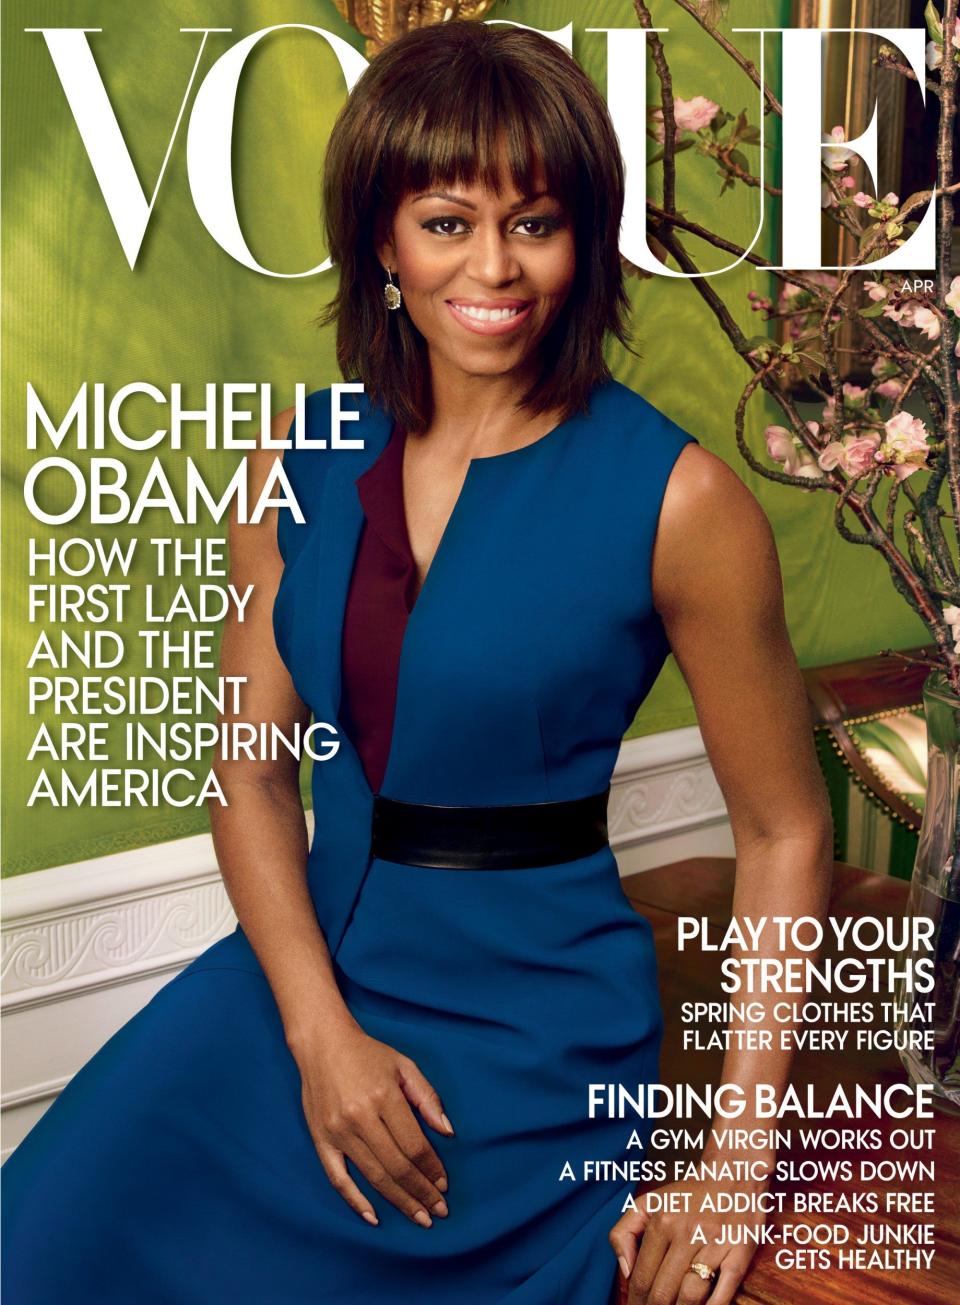 Michelle Obama on the cover of the April 2013 issue of Vogue. - Vogue